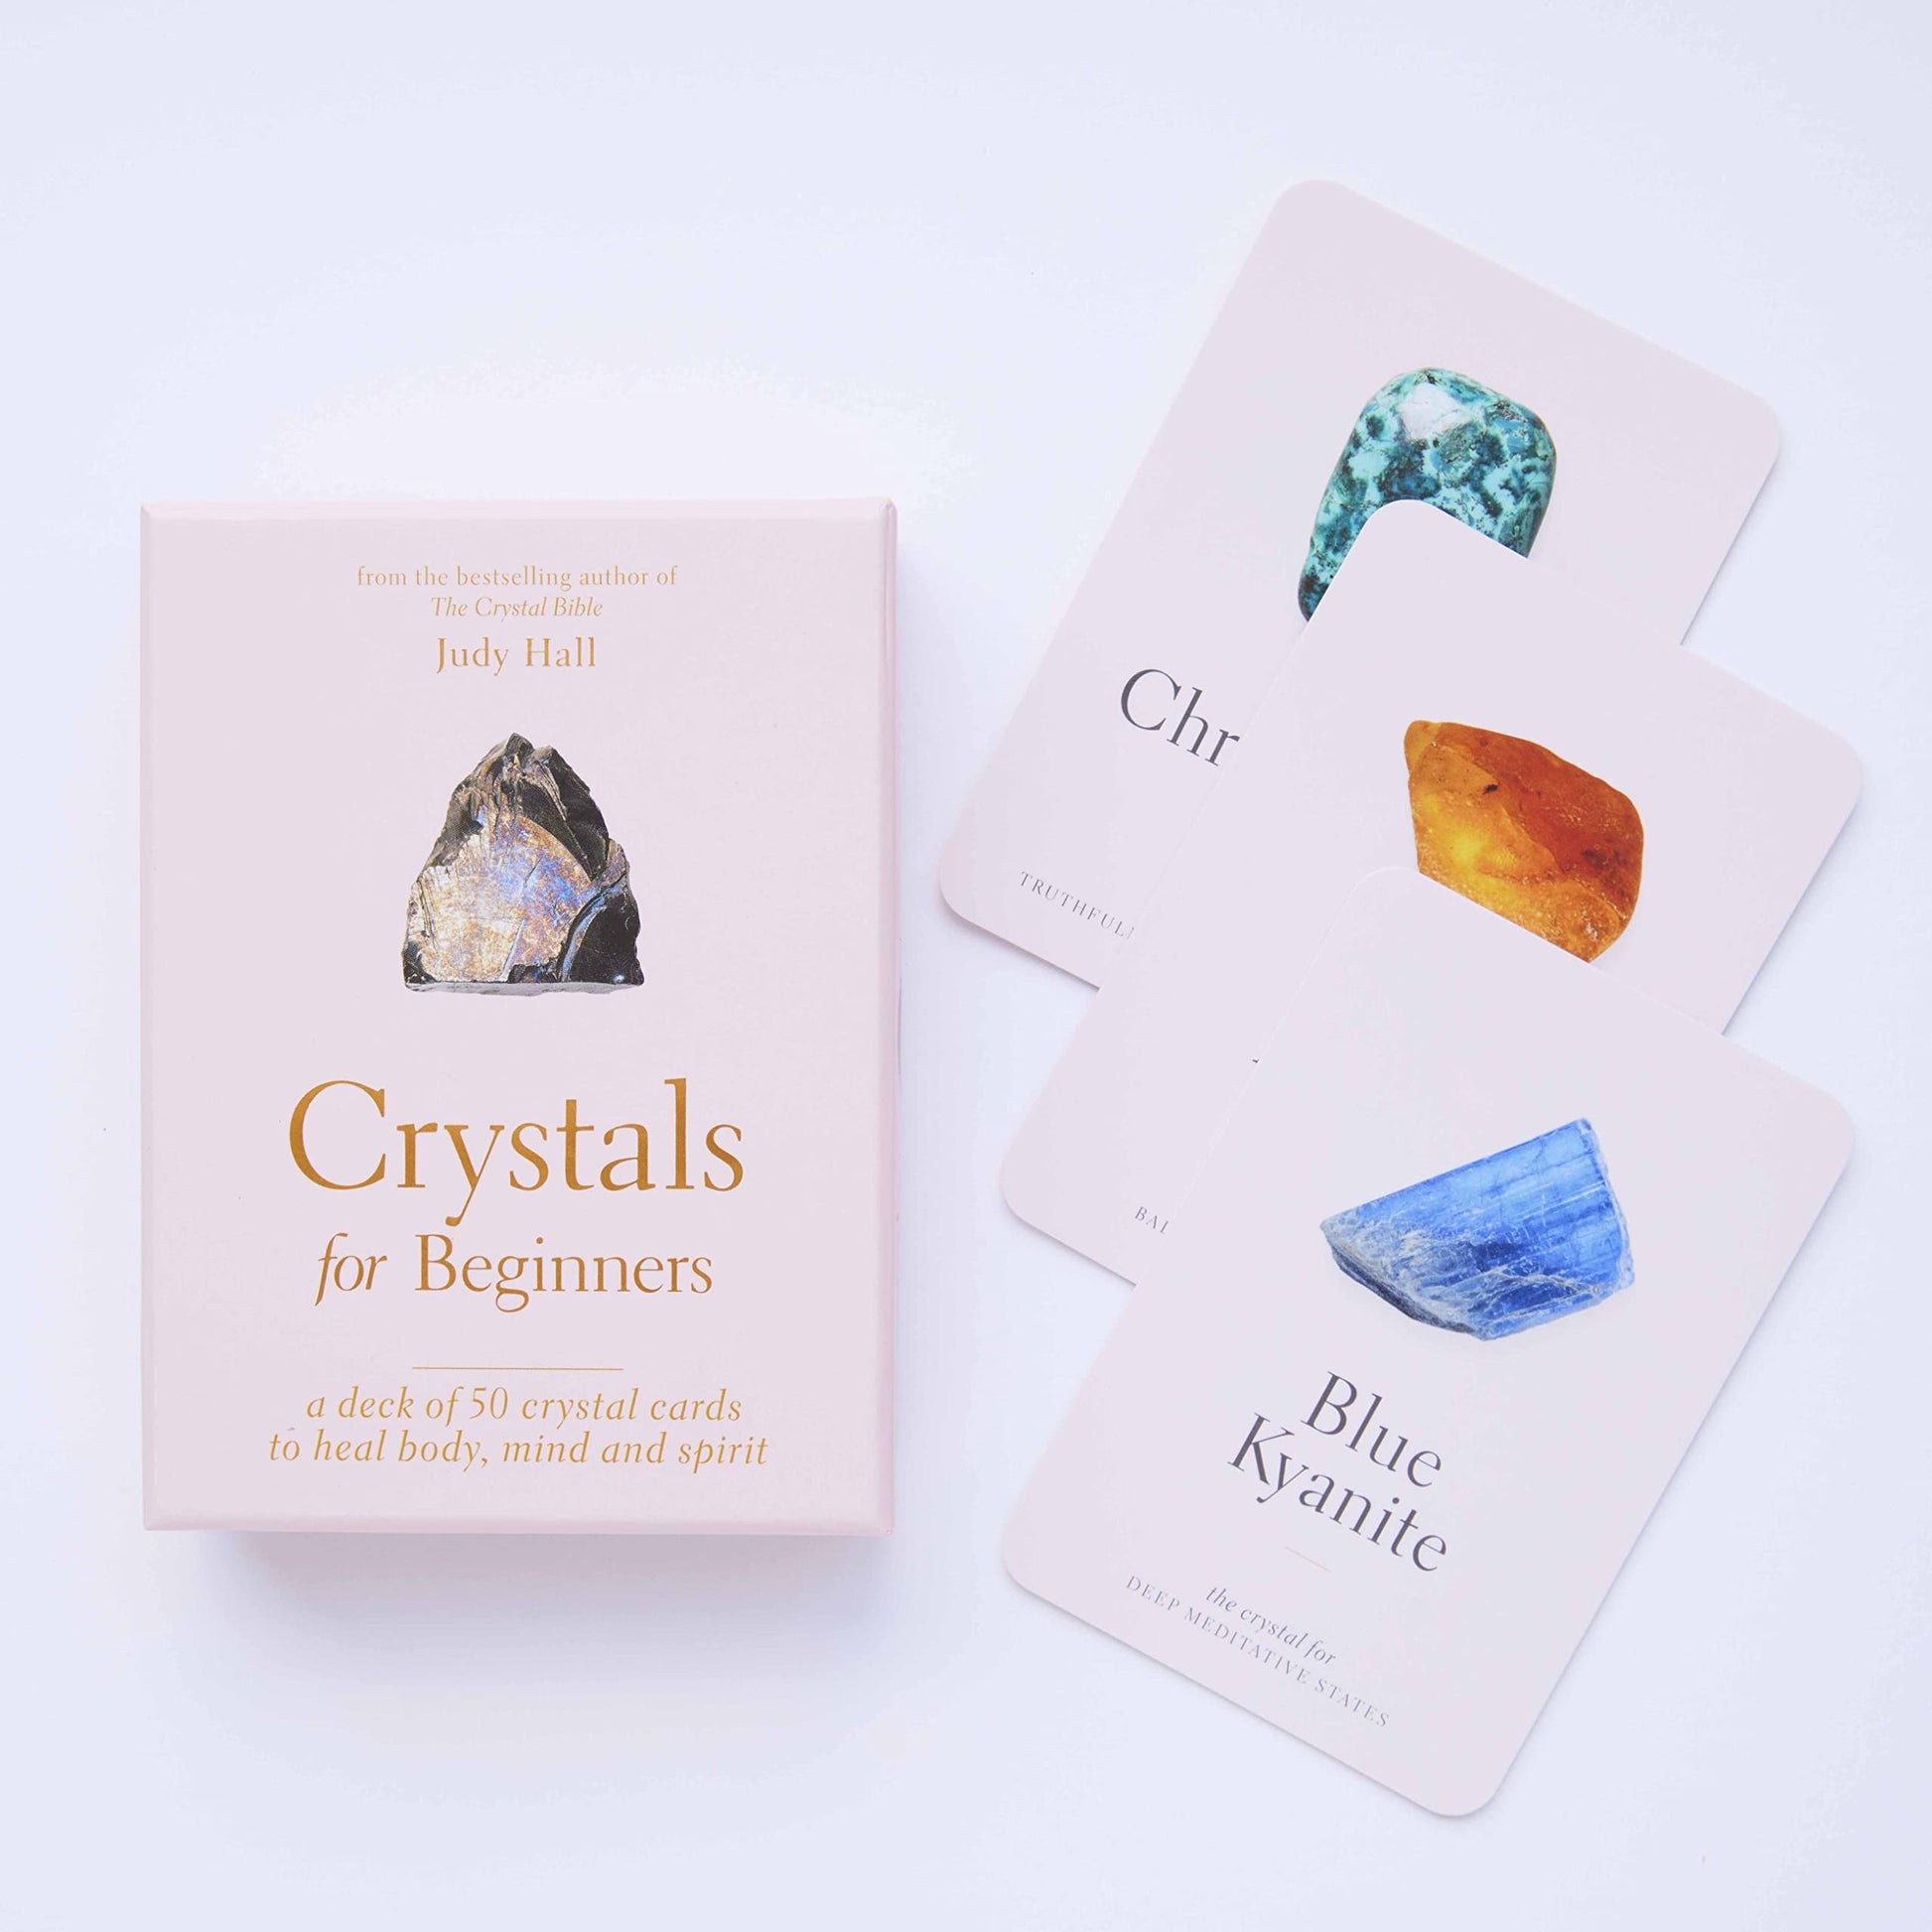 Pale pink Crystals for Beginners Card deck box by Judy hall with a spread of 3 crystal cards